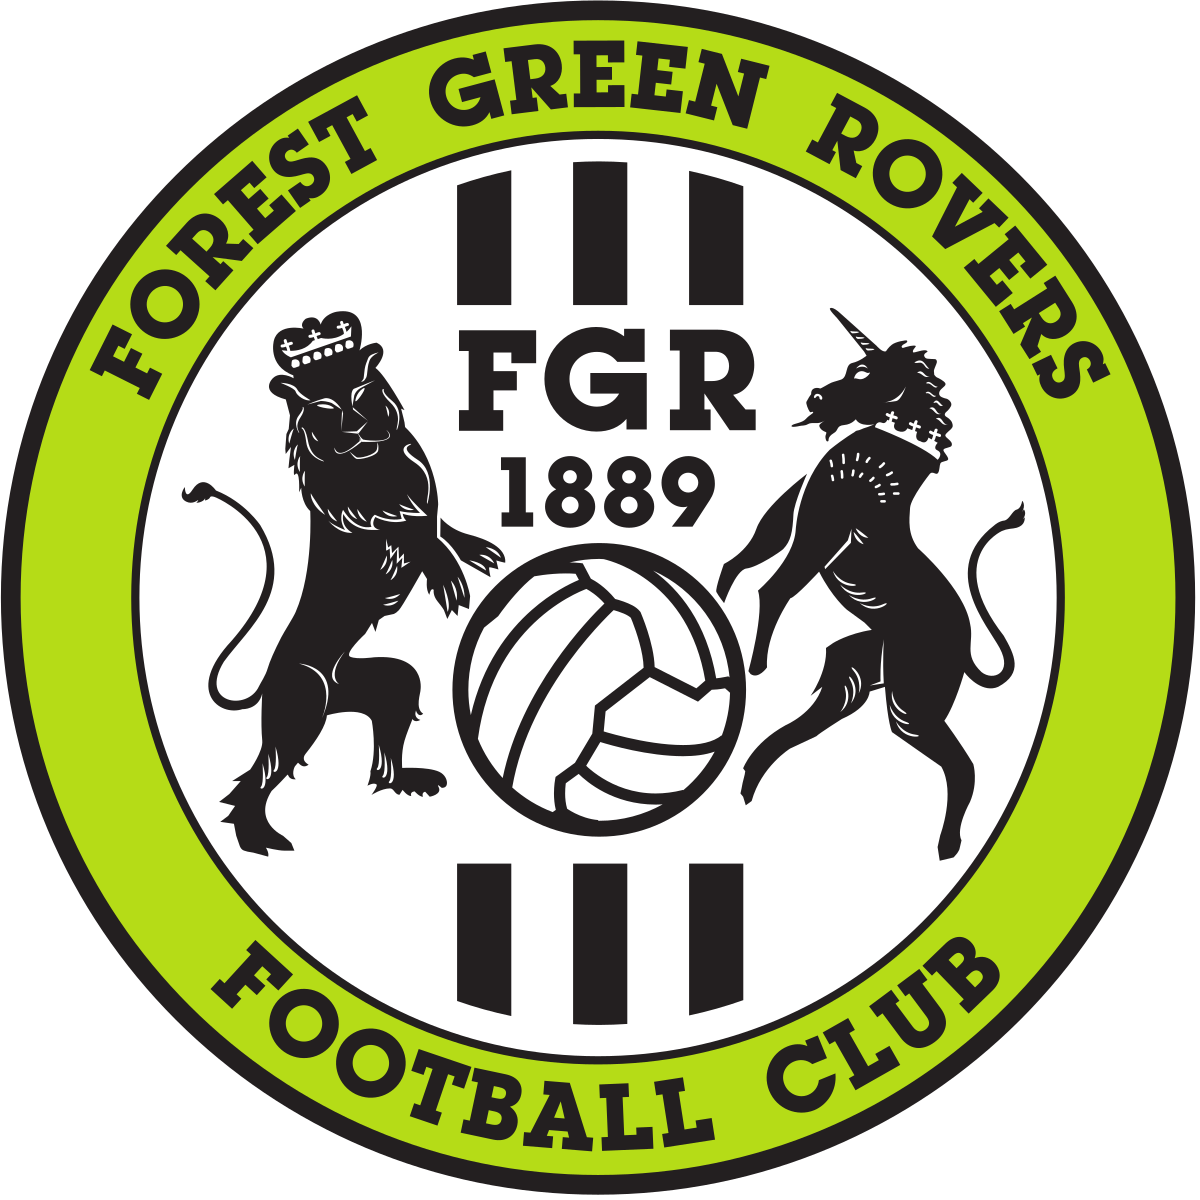 Forest Green Rovers F.c. (1200x1200)